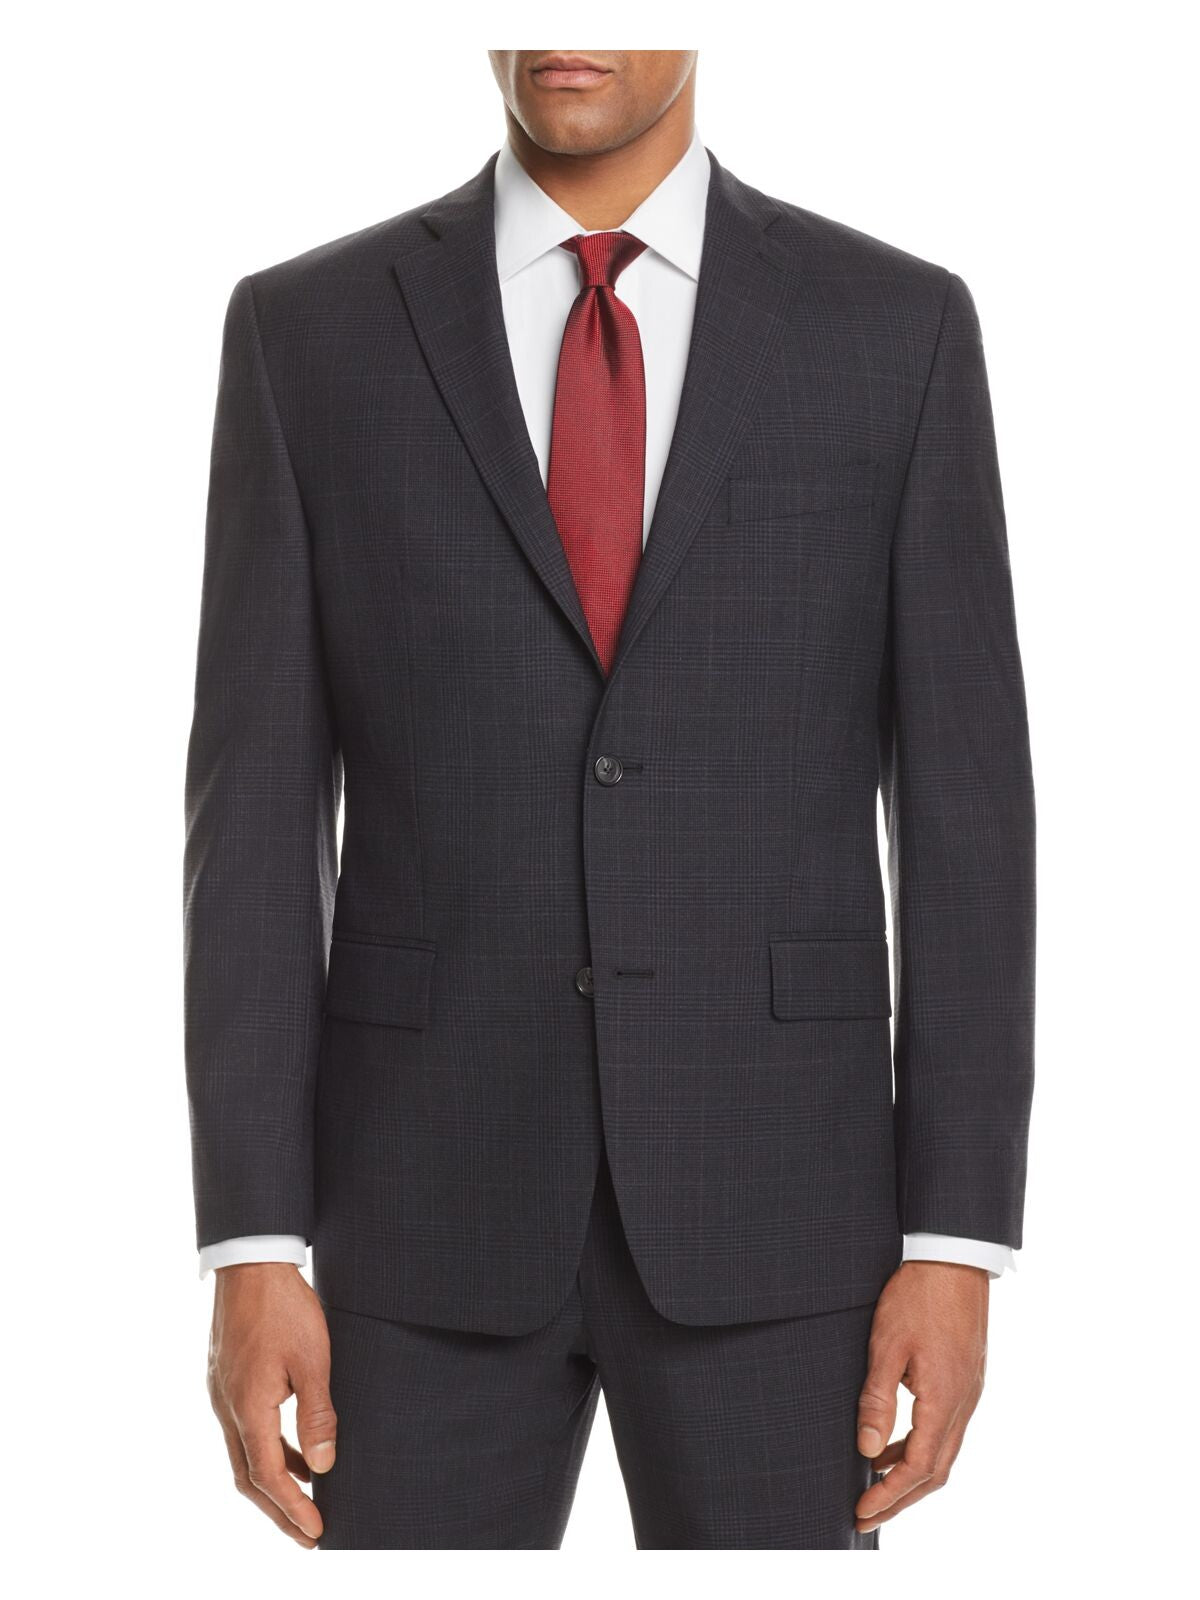 MICHAEL KORS Mens Gray Single Breasted, Stretch, Windowpane Plaid Classic Fit Stretch Suit Separate Blazer Jacket 38R